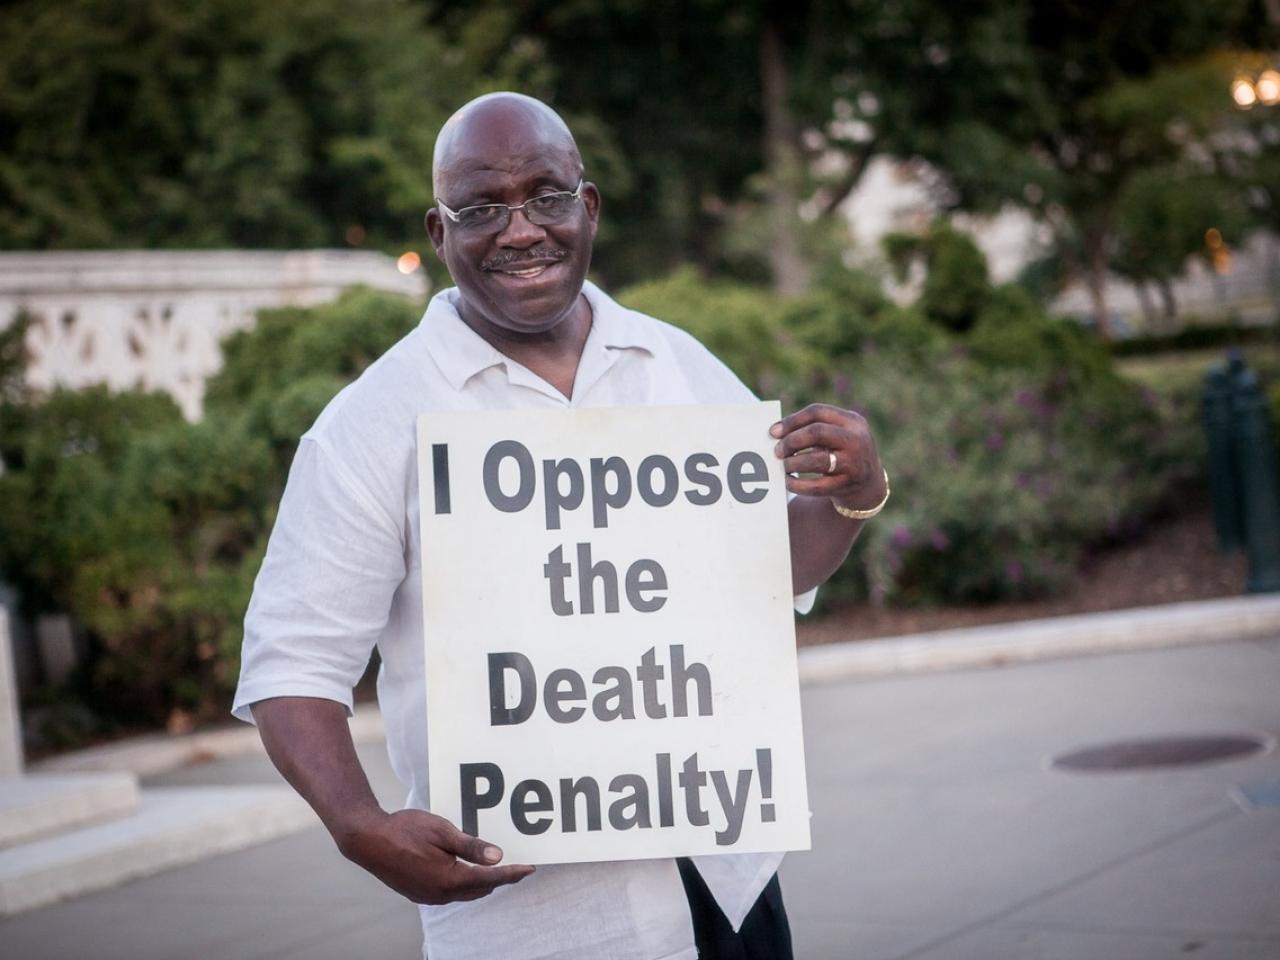 Jerry Givens smiles, holding a sign with "I oppose the death penalty!"